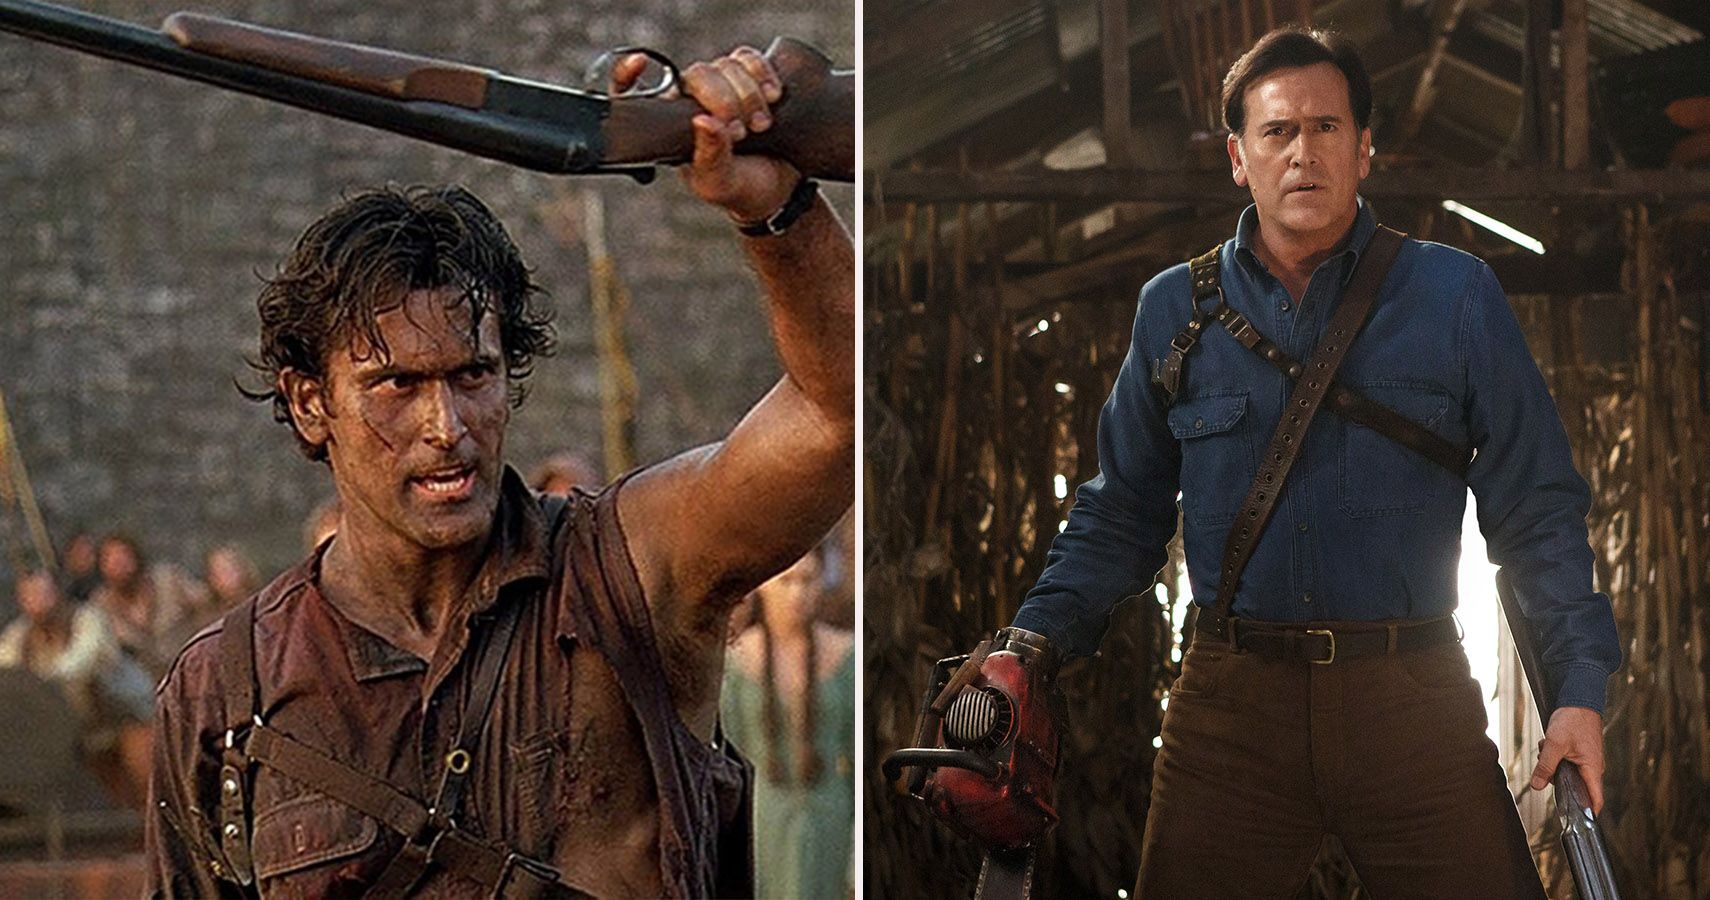 Every 'Evil Dead' Game Ranked From Best To Worst